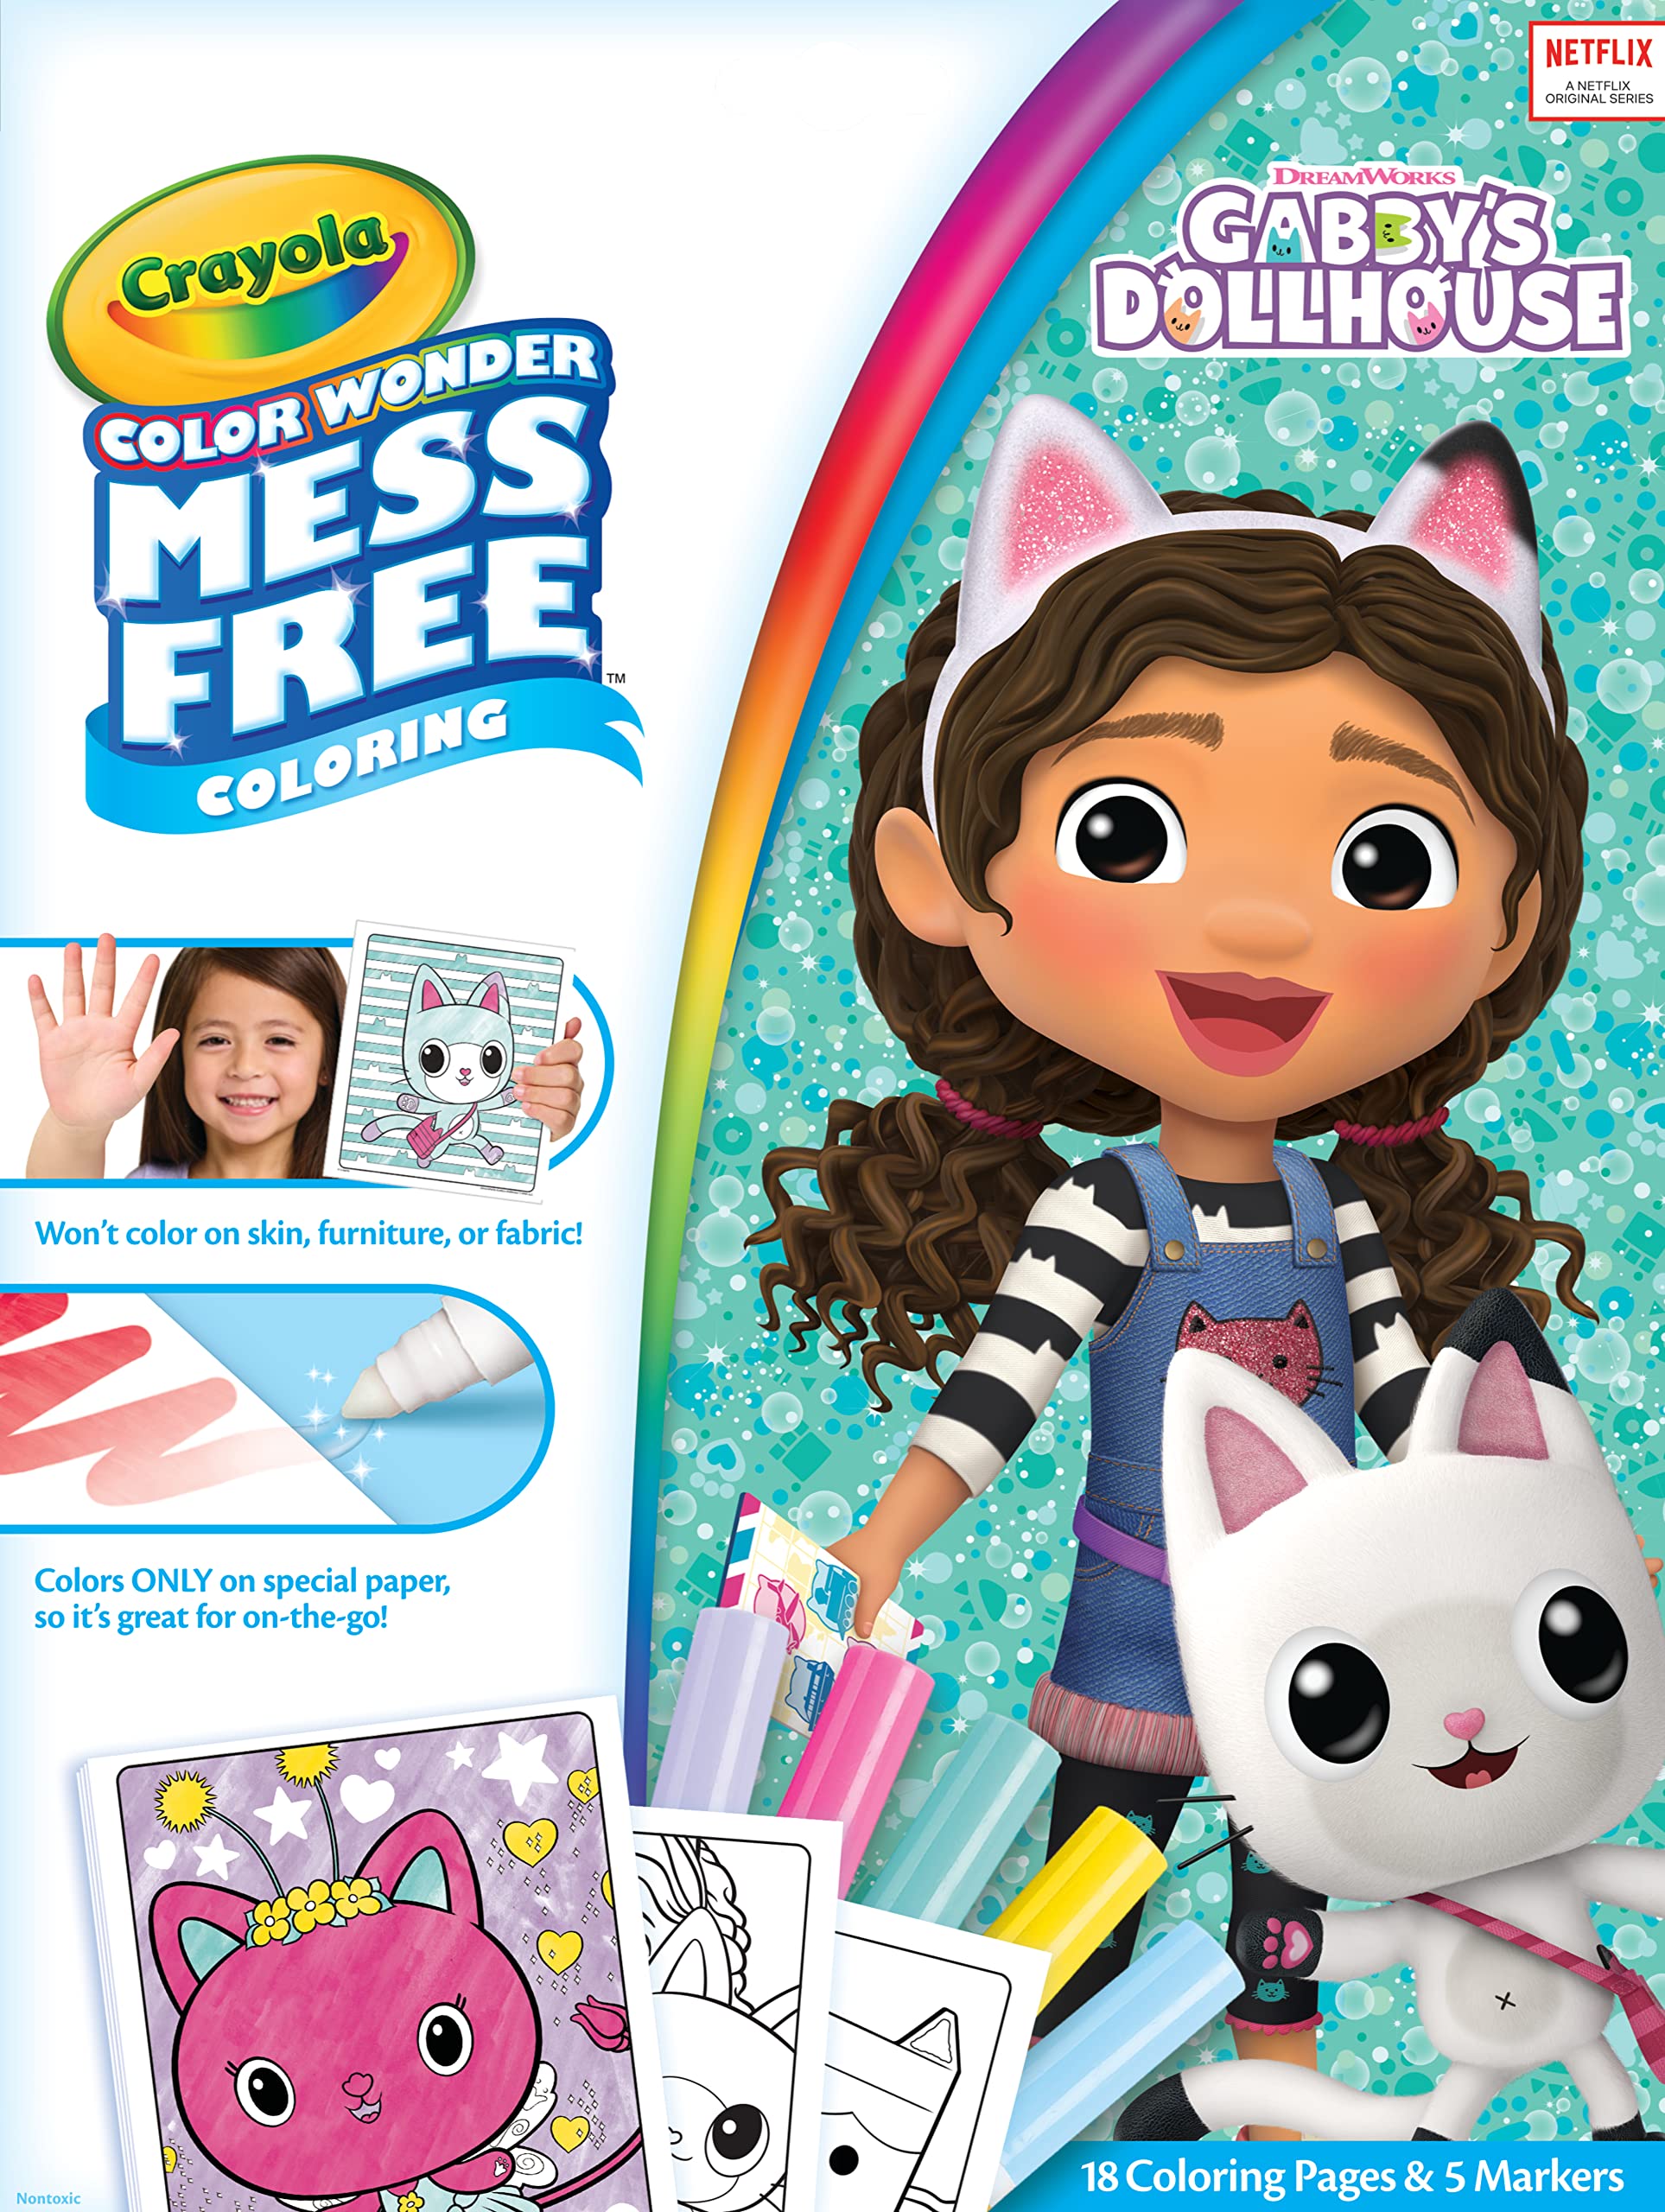 Crayola gabbys dollhouse color wonder mess free coloring pages no mess markers gift for kids everything else